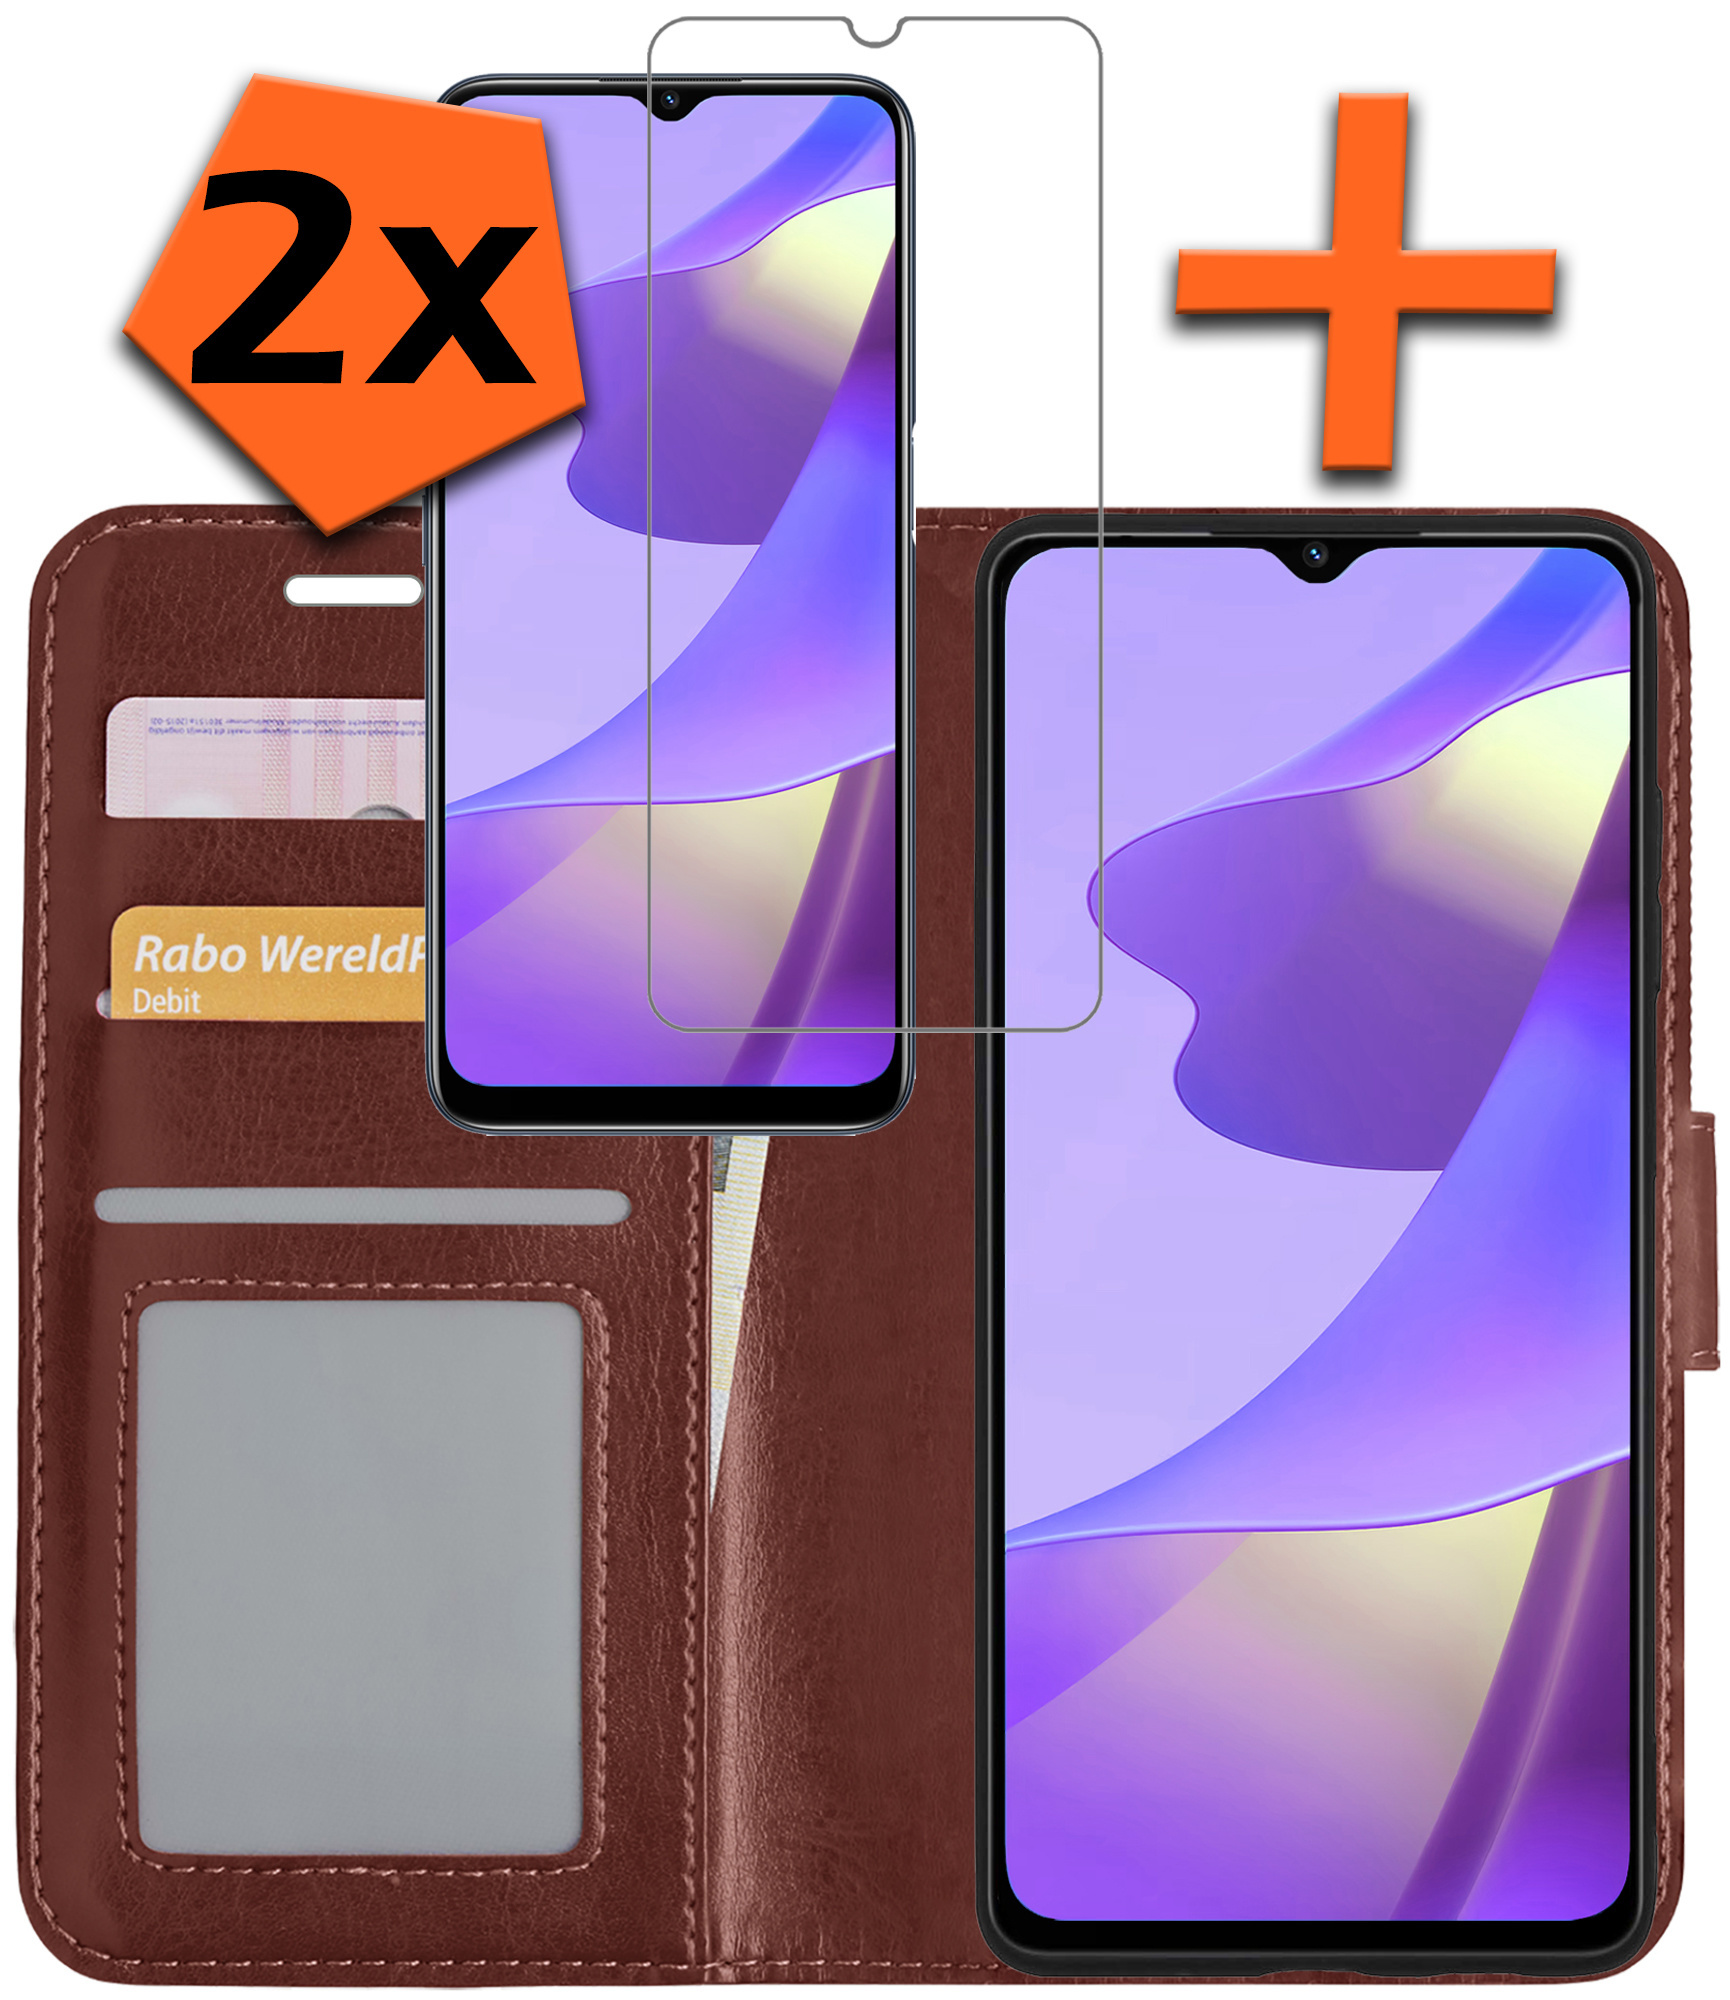 Nomfy OPPO A16s Hoesje Bookcase Met 2x Screenprotector - OPPO A16s Screenprotector 2x - OPPO A16s Book Case Met 2x Screenprotector Bruin